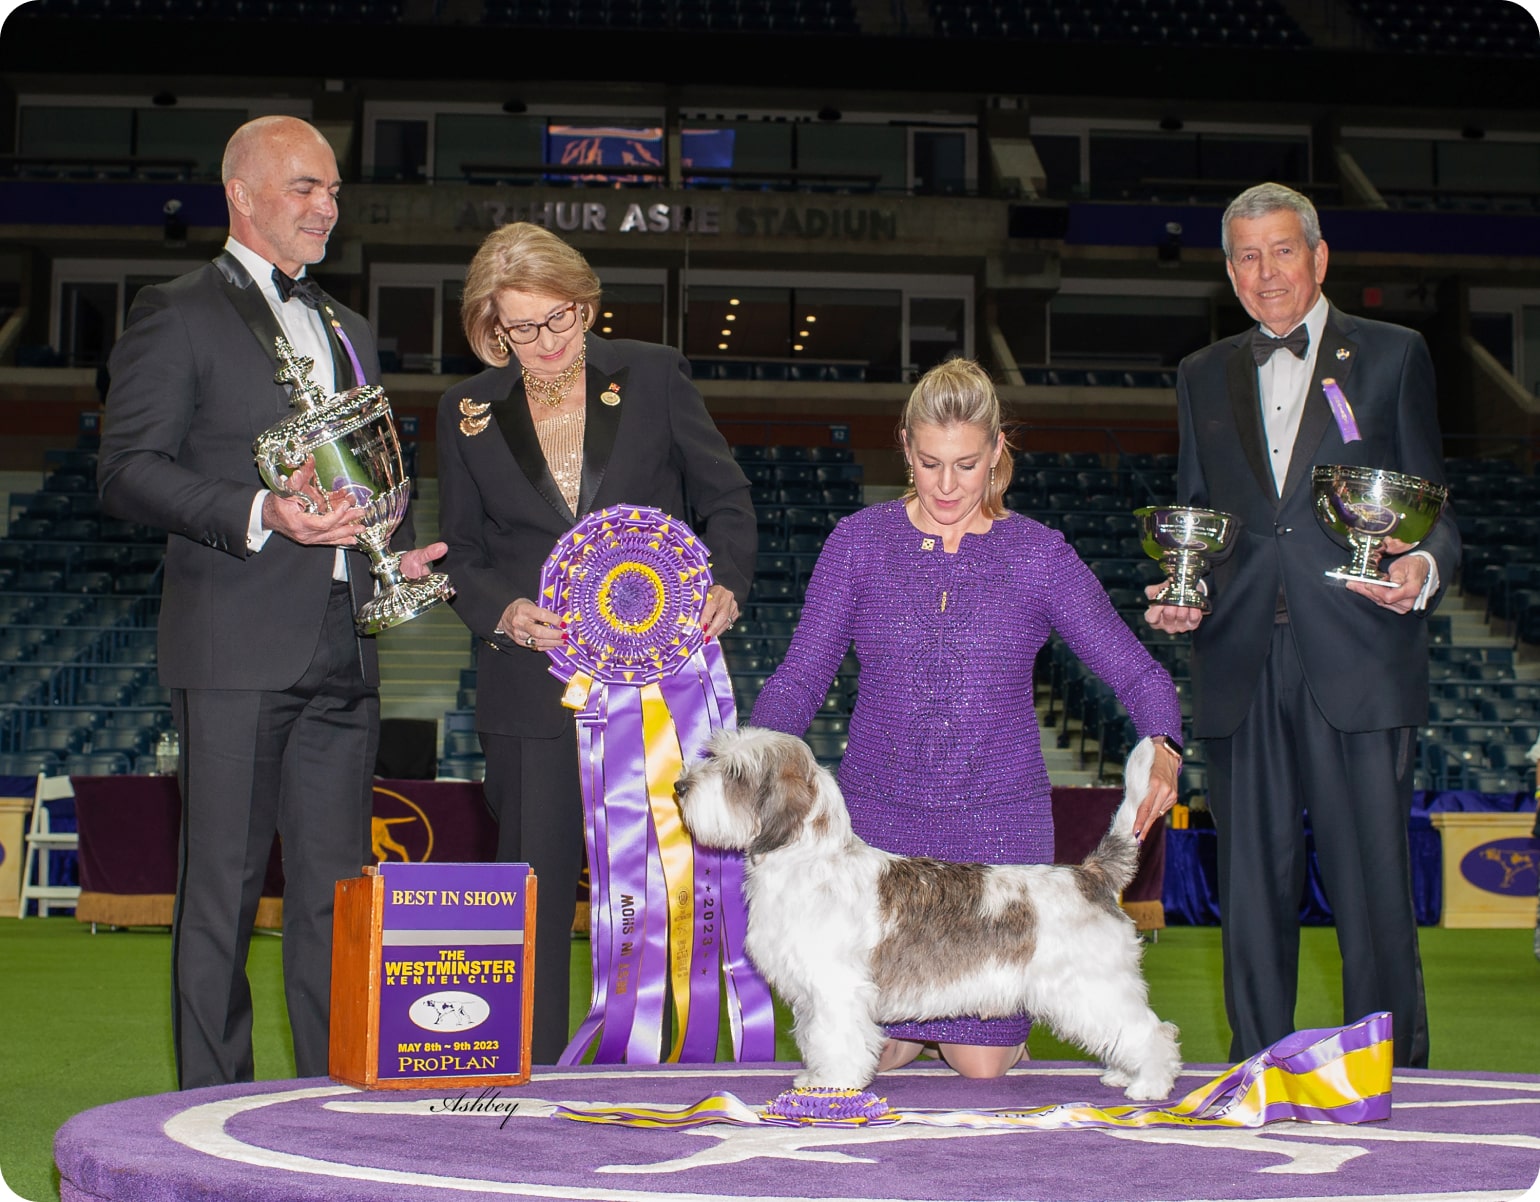 Westminster schnauzers at the westminster dog show.